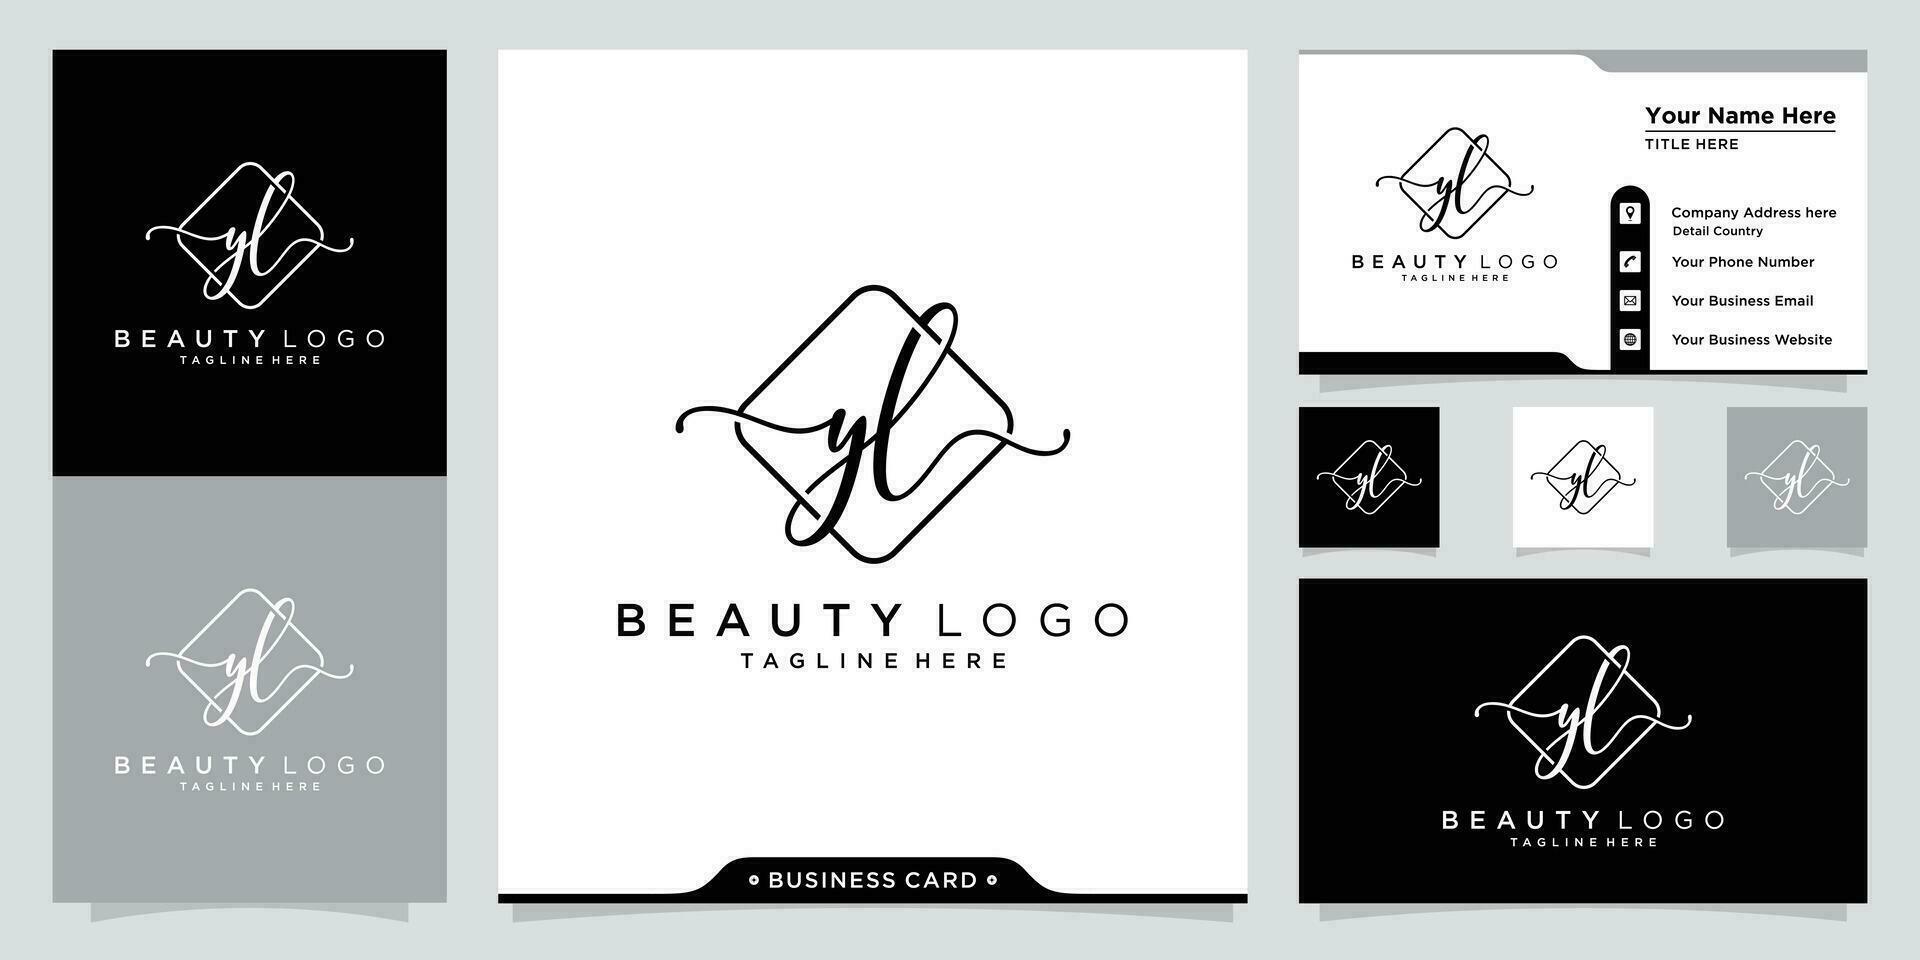 YL Initial handwriting logo vector with business card design